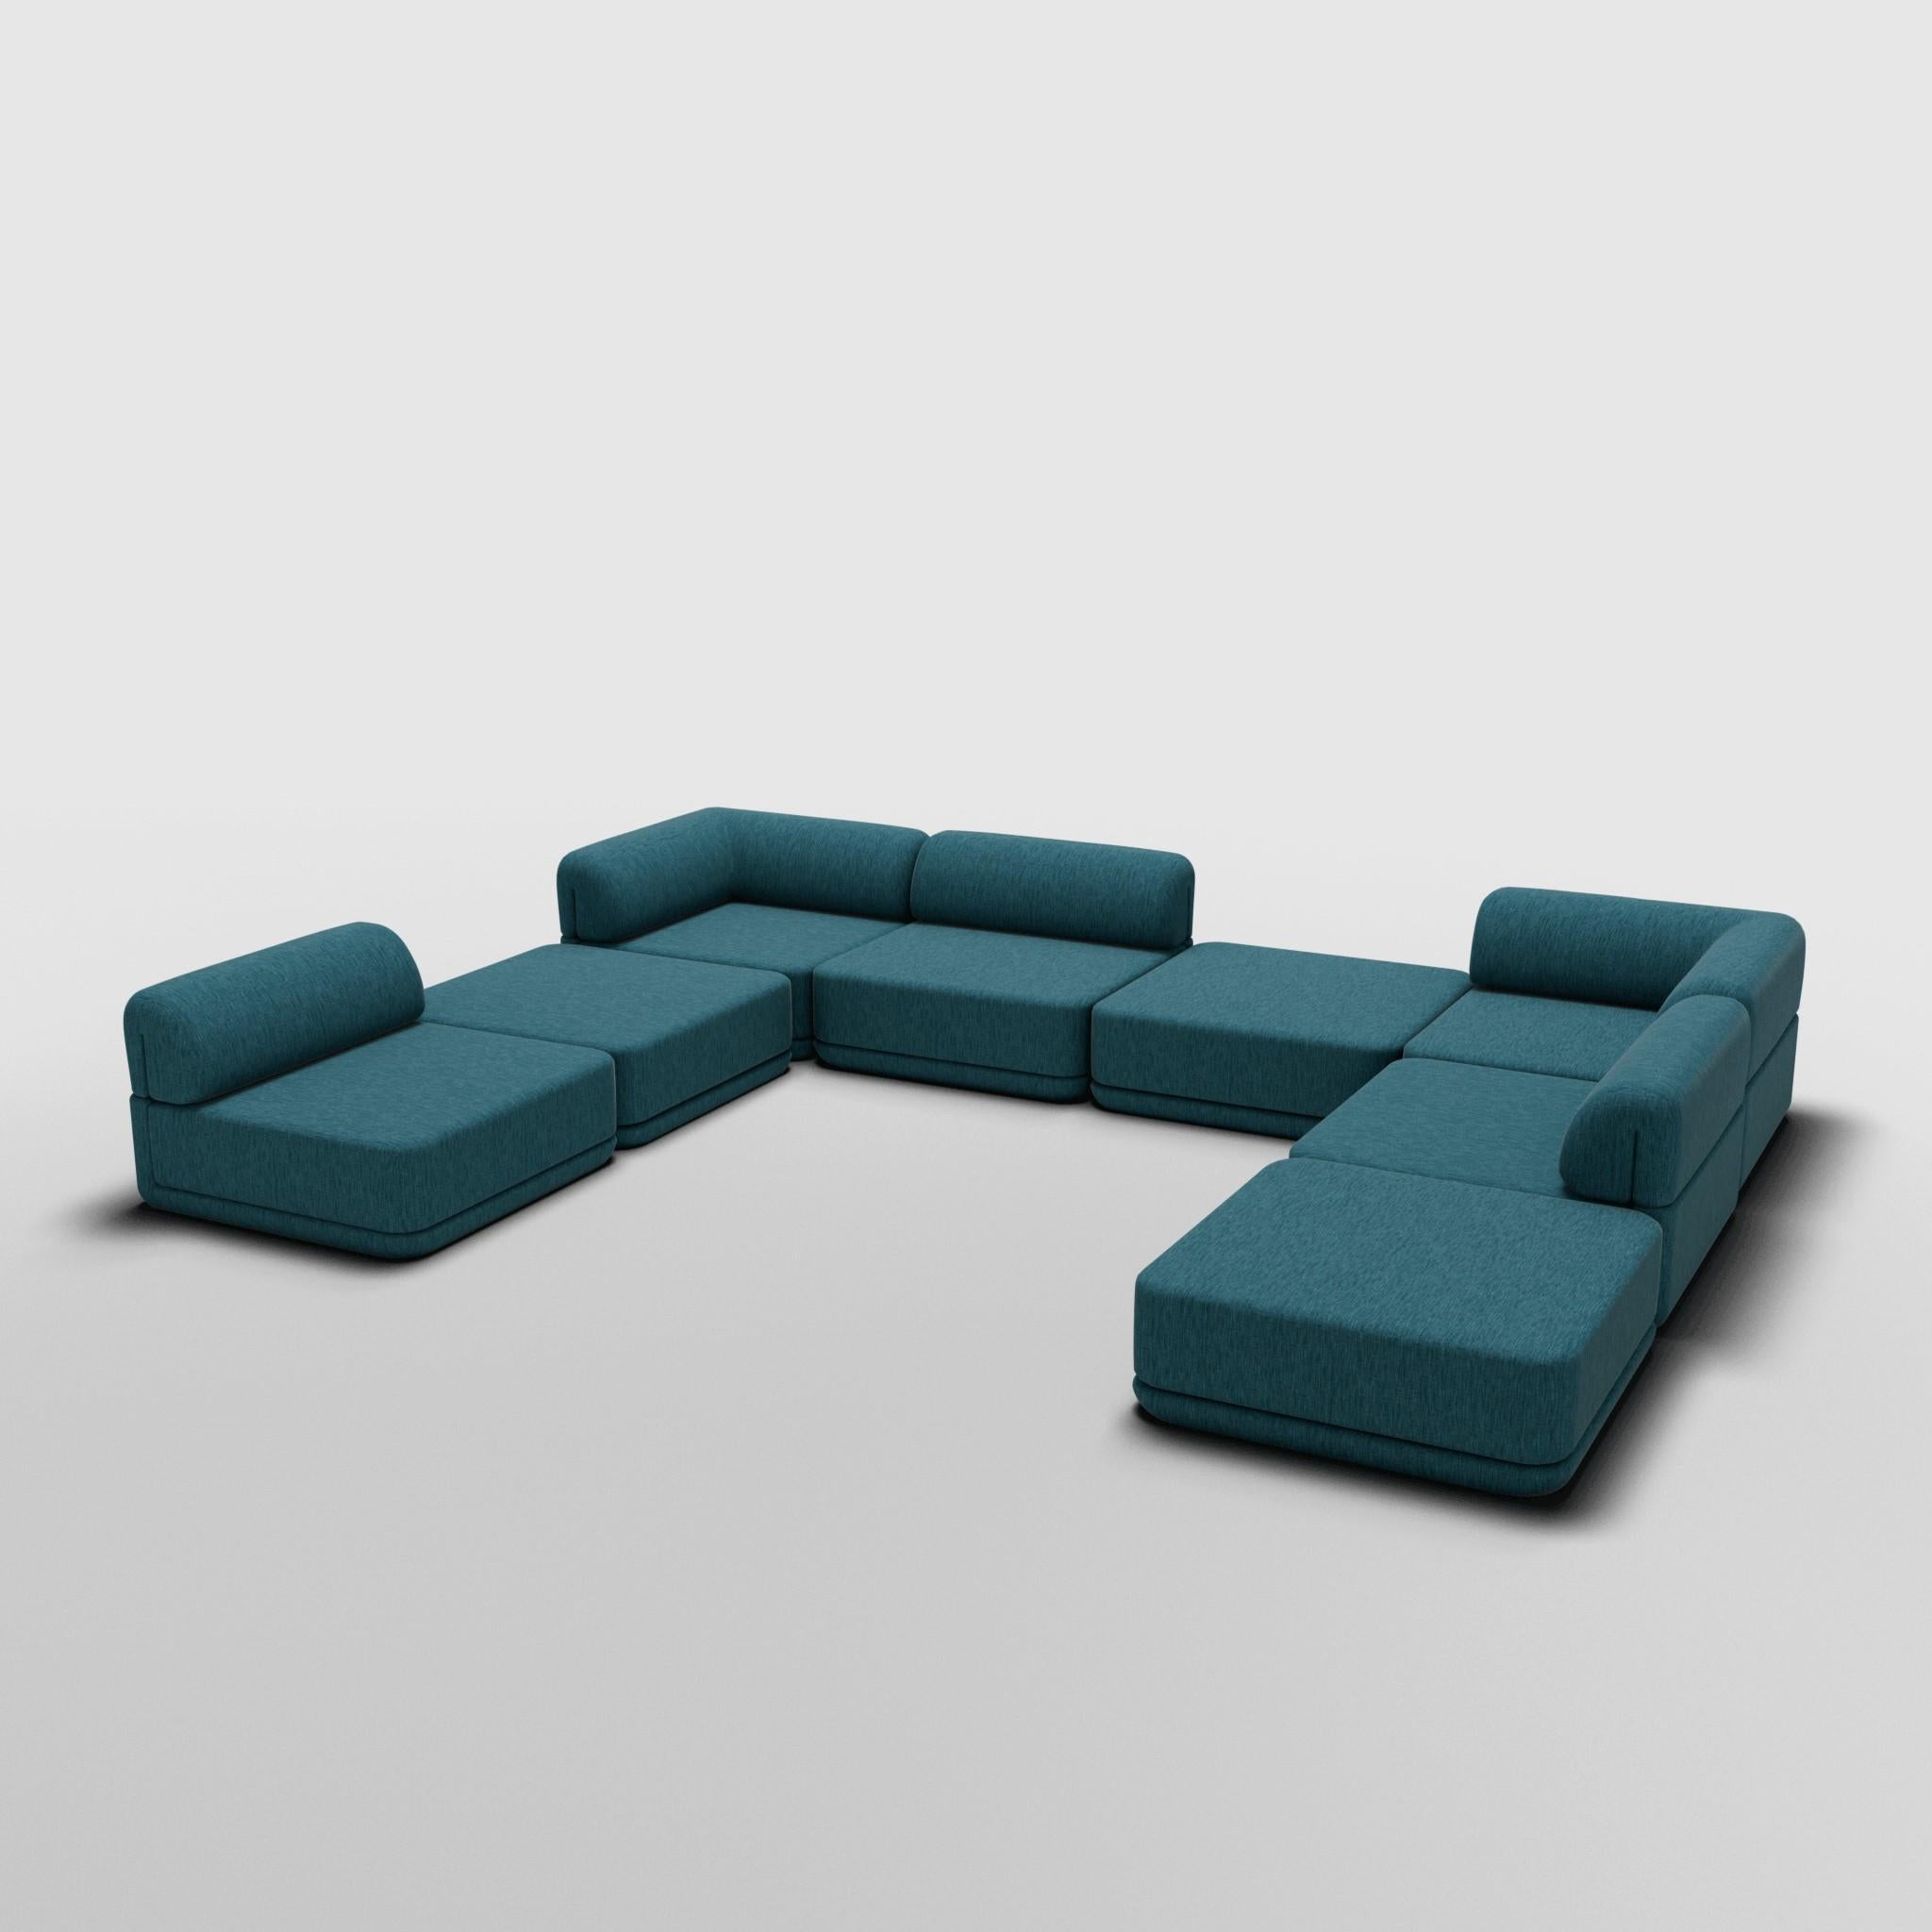 Mid-Century Modern The Cube Sofa - Corner Full Mix Sectional For Sale